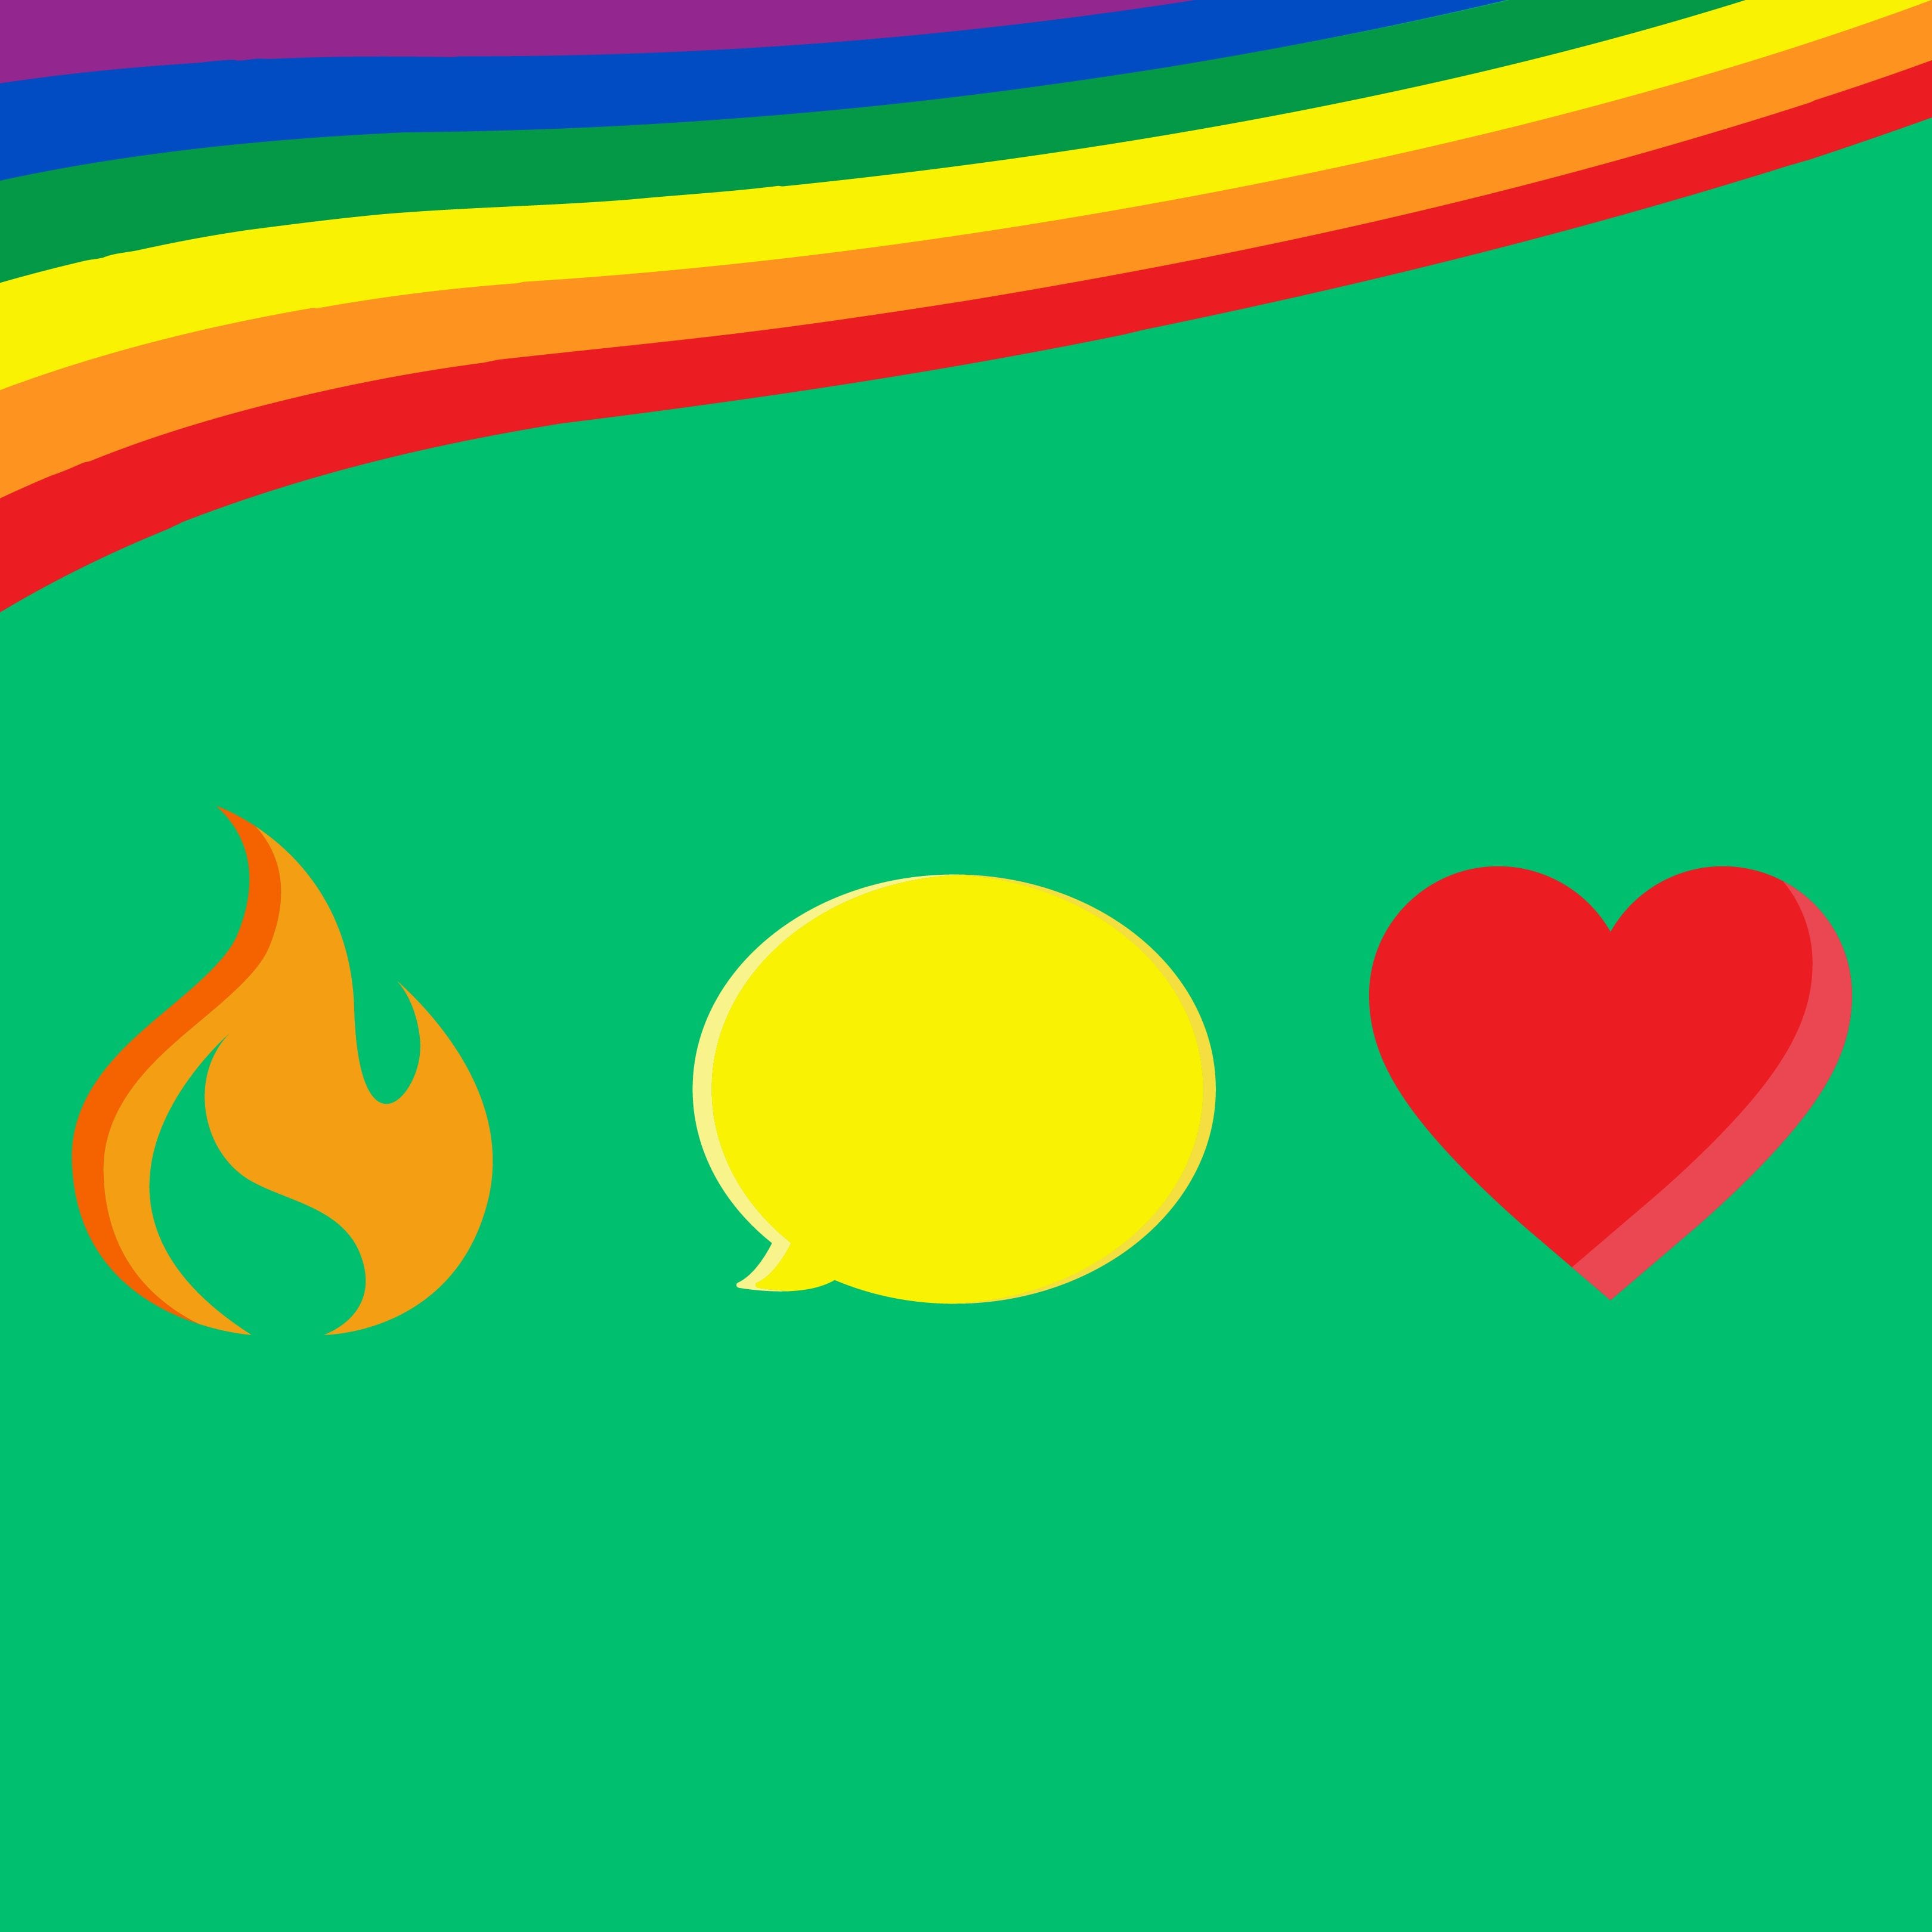 Fire, messaging, heart, and rainbow icons on green background